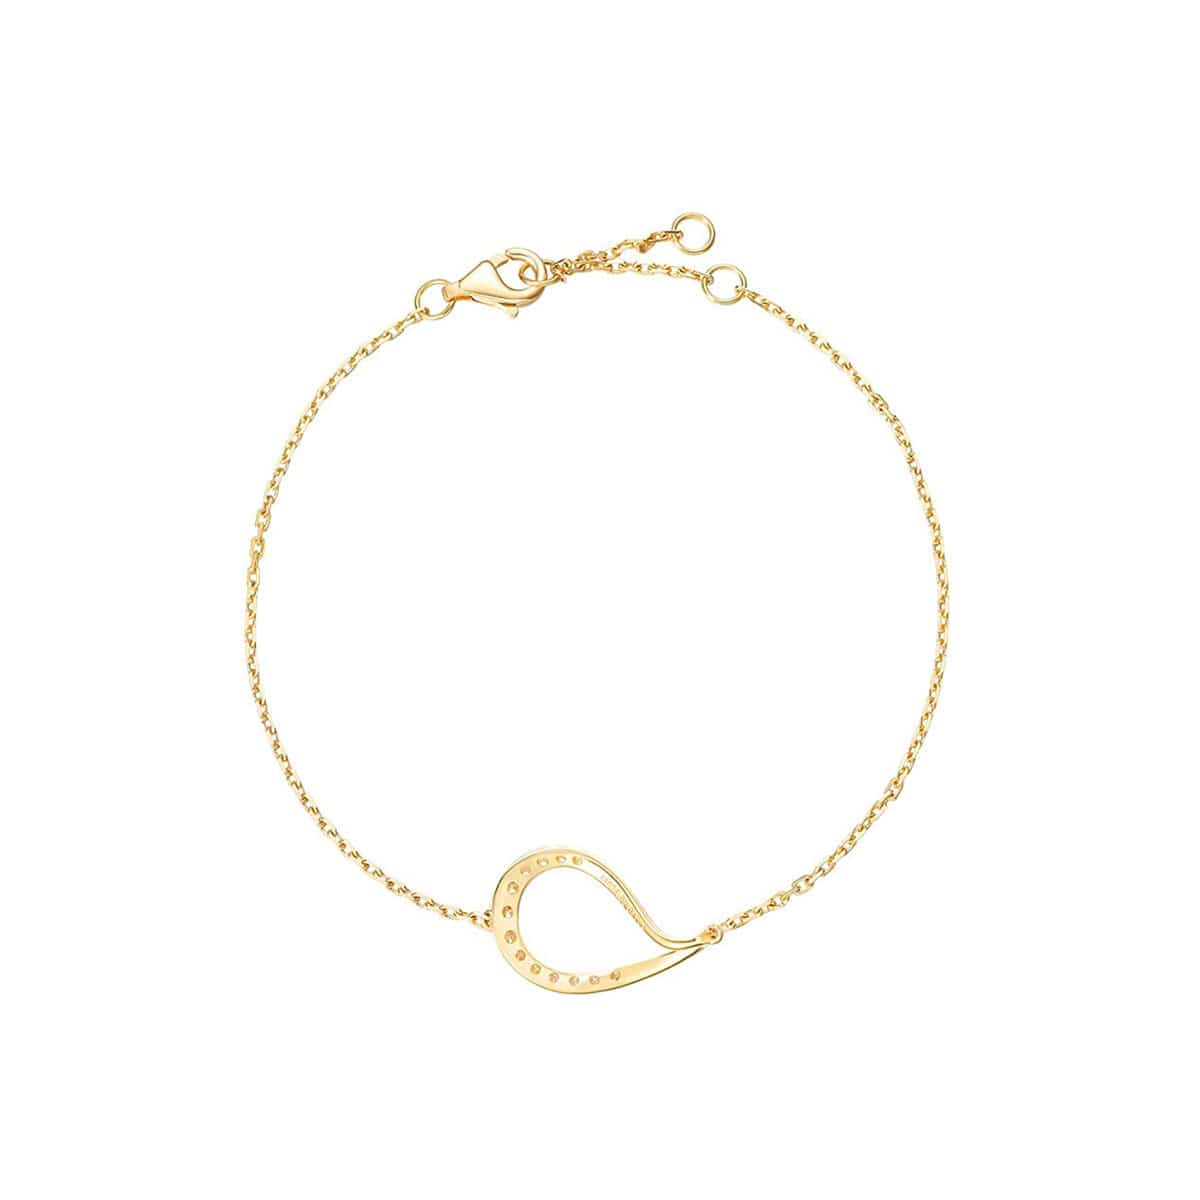 FANCIME "Sweet Dewdrop" Simple Thin 18K Solid Yellow Gold Bracelet Show